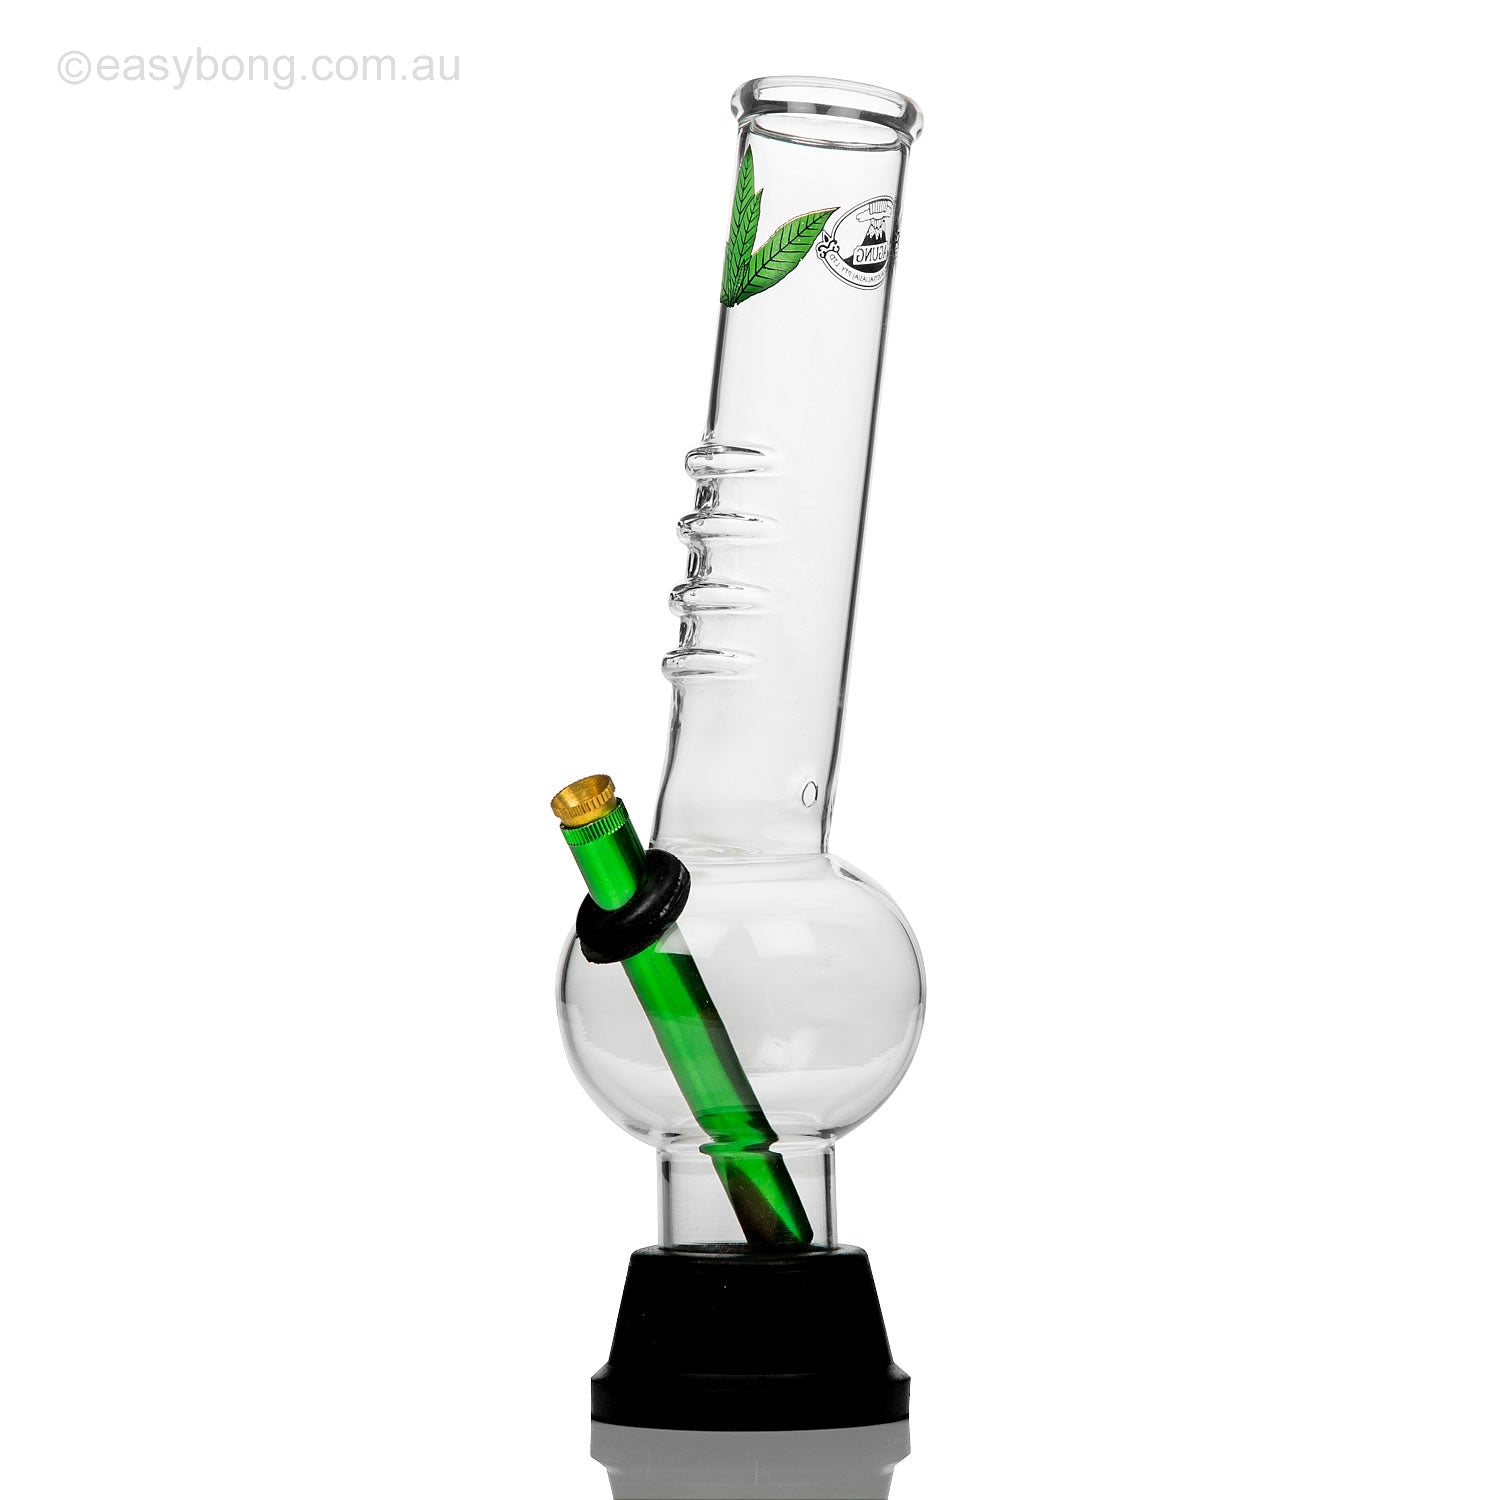 Cheap Aussie style bong with cannabis leaf motif and hand grip.